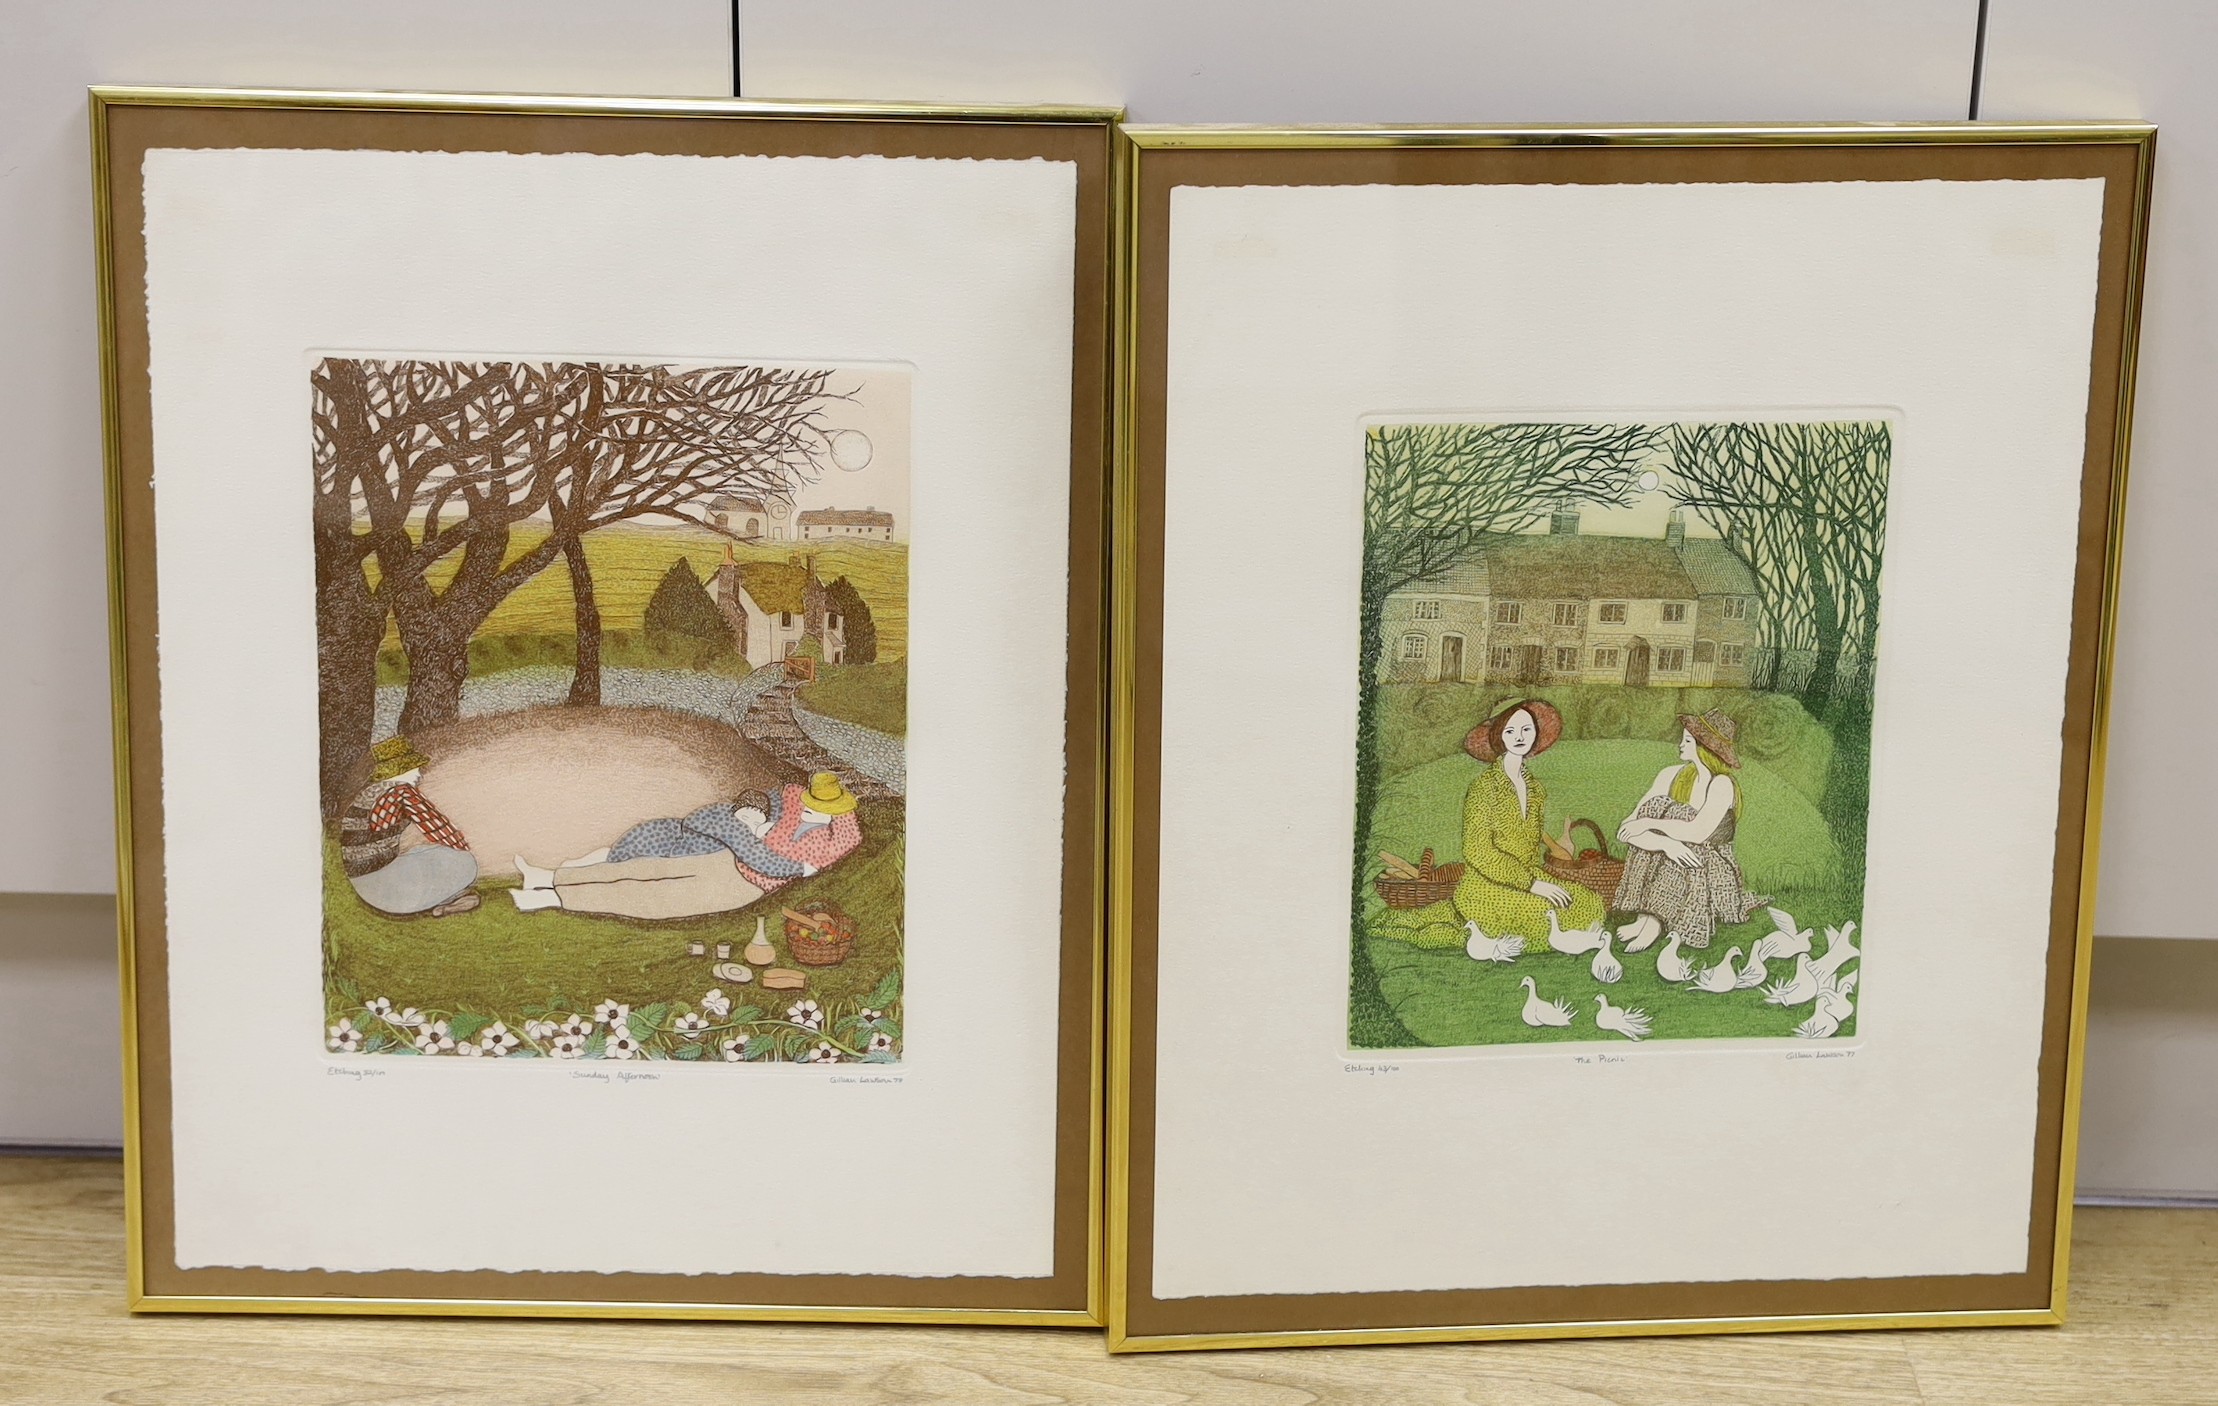 Gillian Lawson (1936-), two limited edition etchings, "The Picnic" and "Sunday Afternoon", signed in